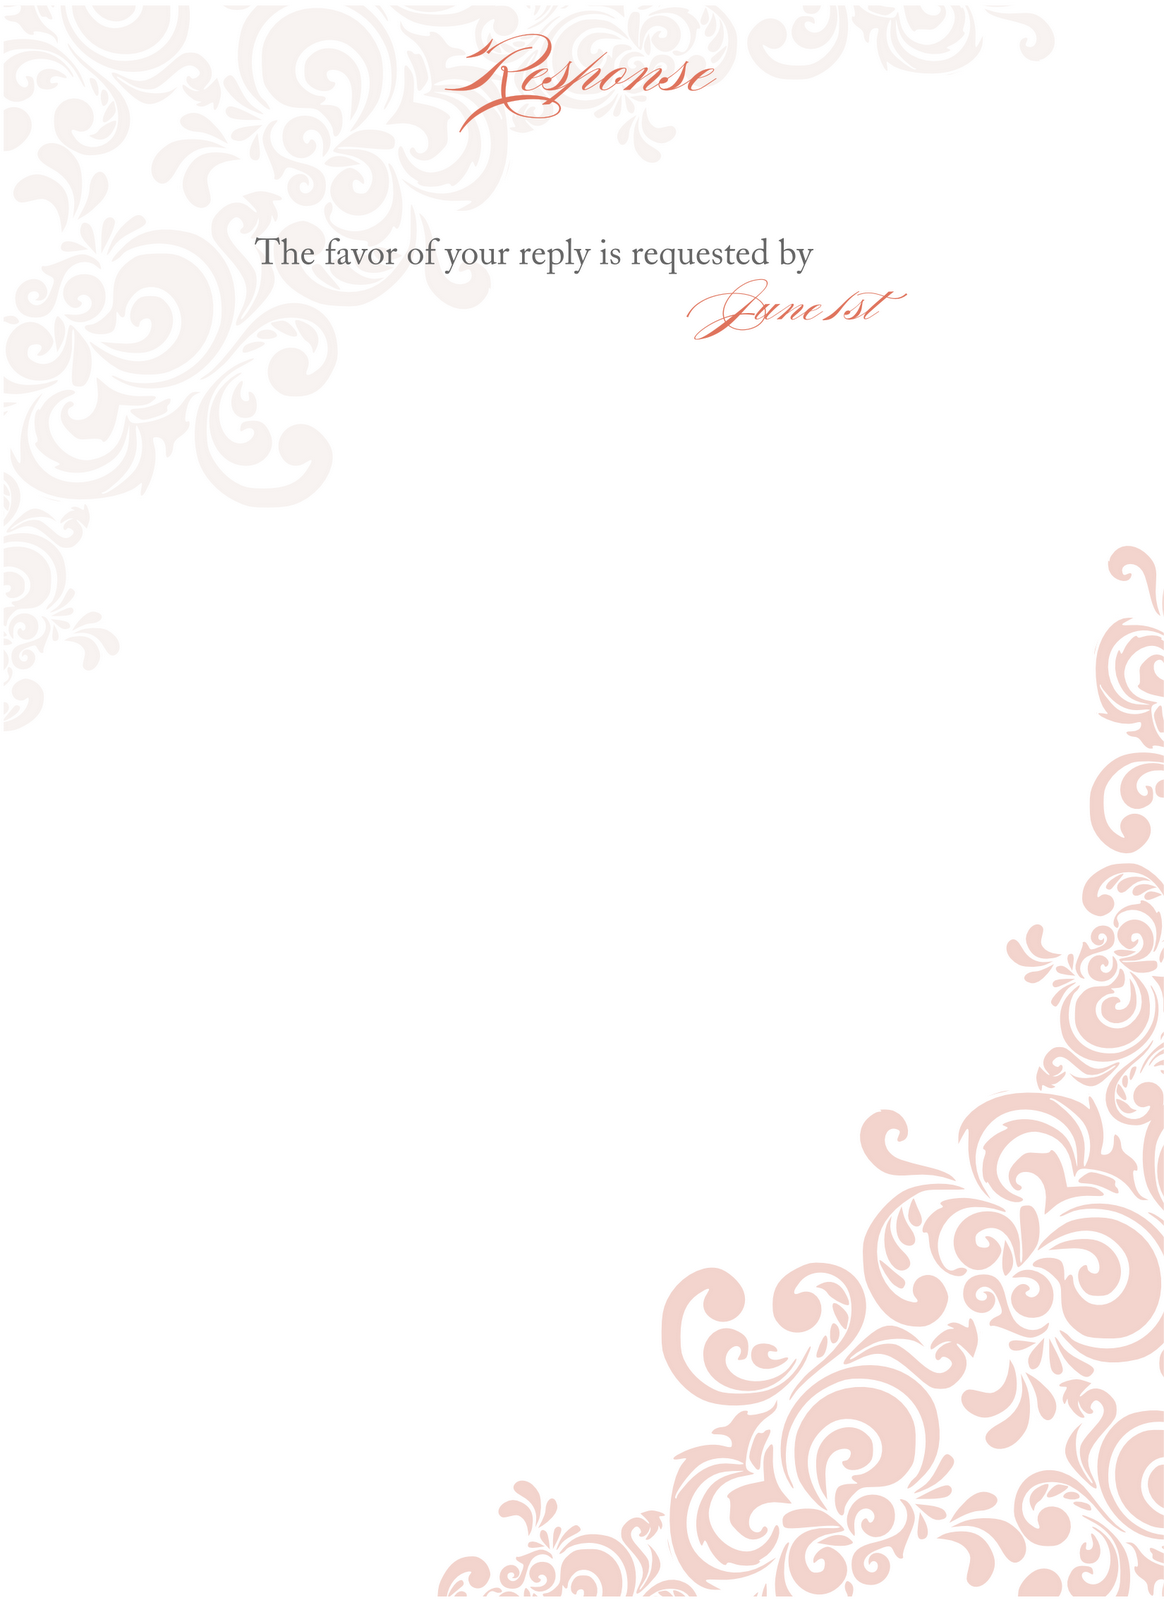 51 Report Free Blank Template For Wedding Invitation Now for Free Blank Template For Wedding Invitation